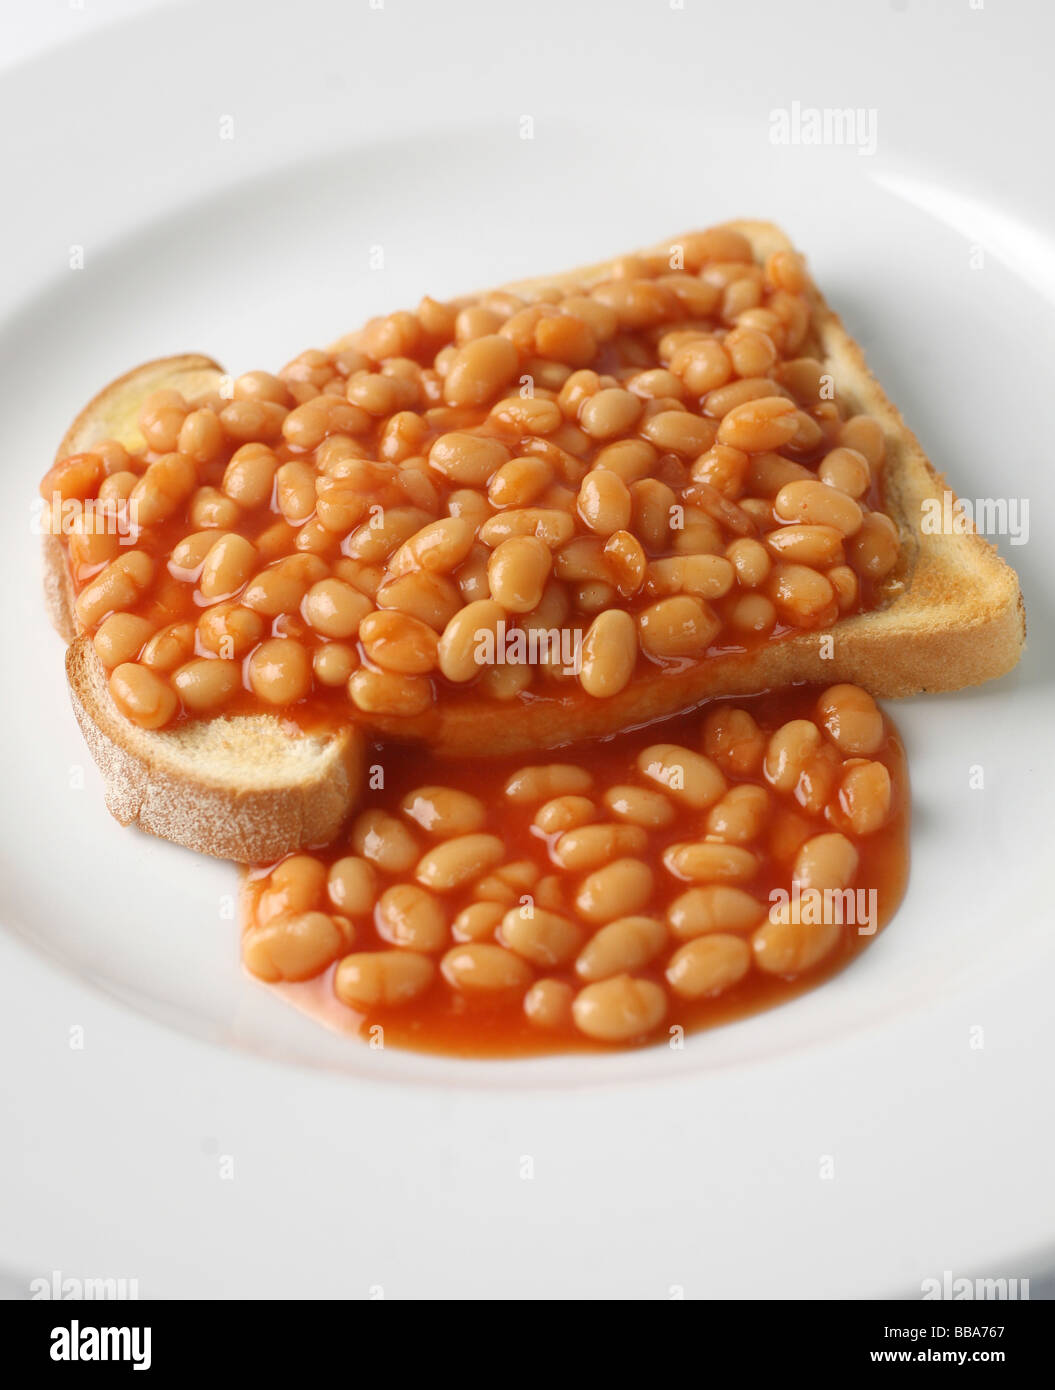 Pictured baked beans on toast Stock Photo